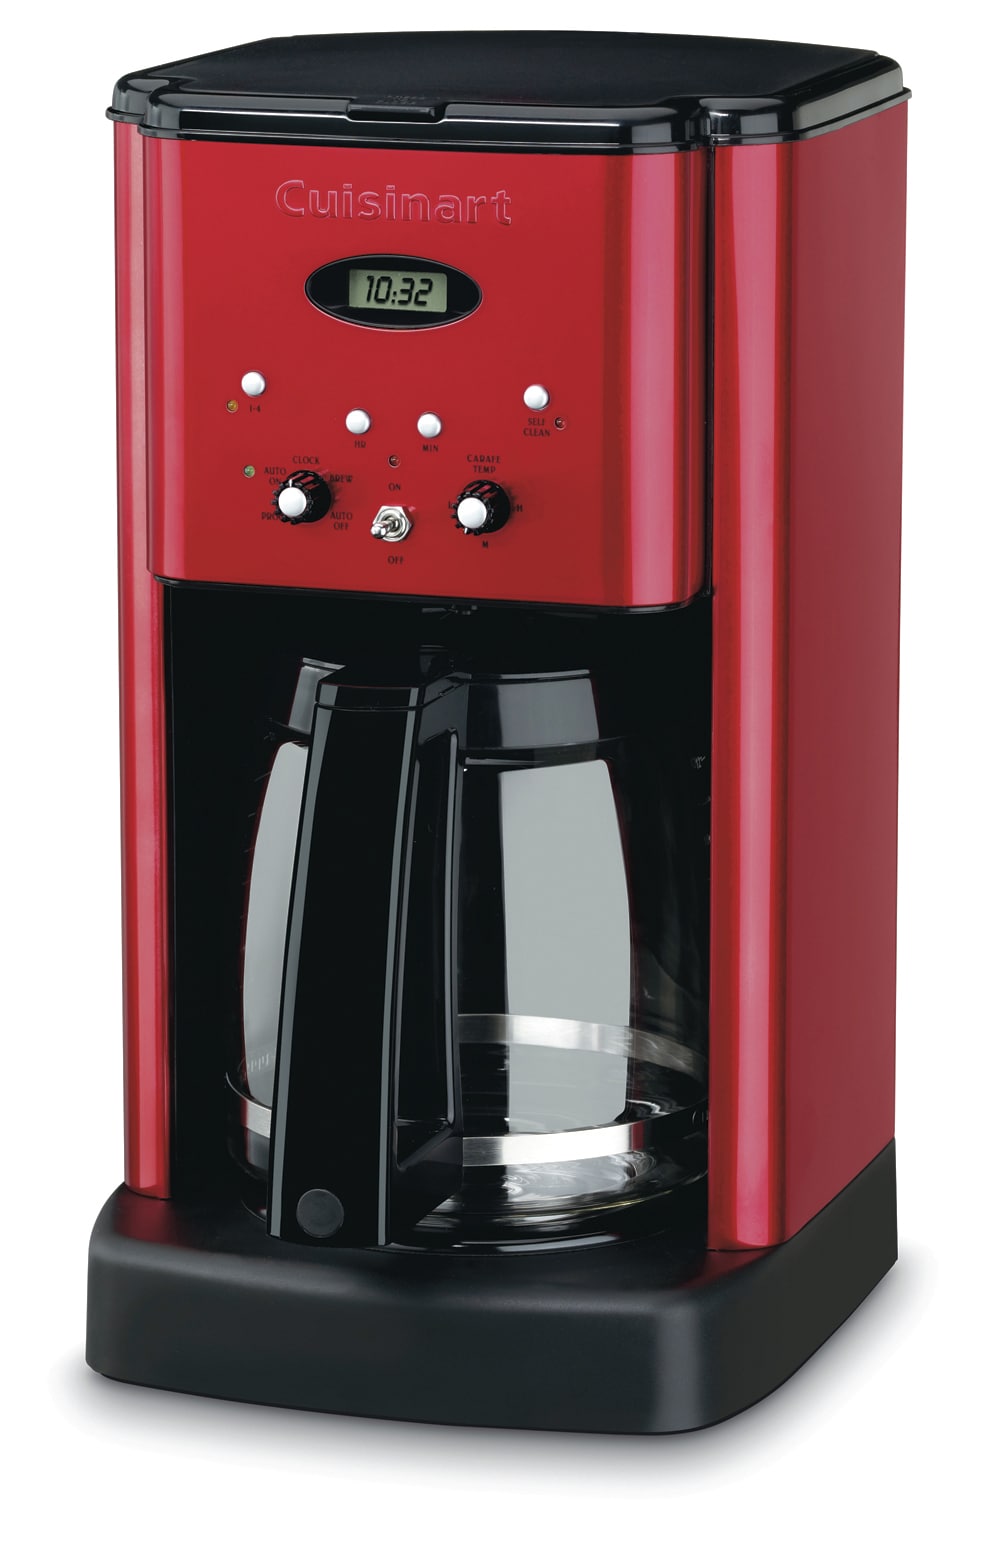 Better Chef 12-cup Red Coffeemaker 